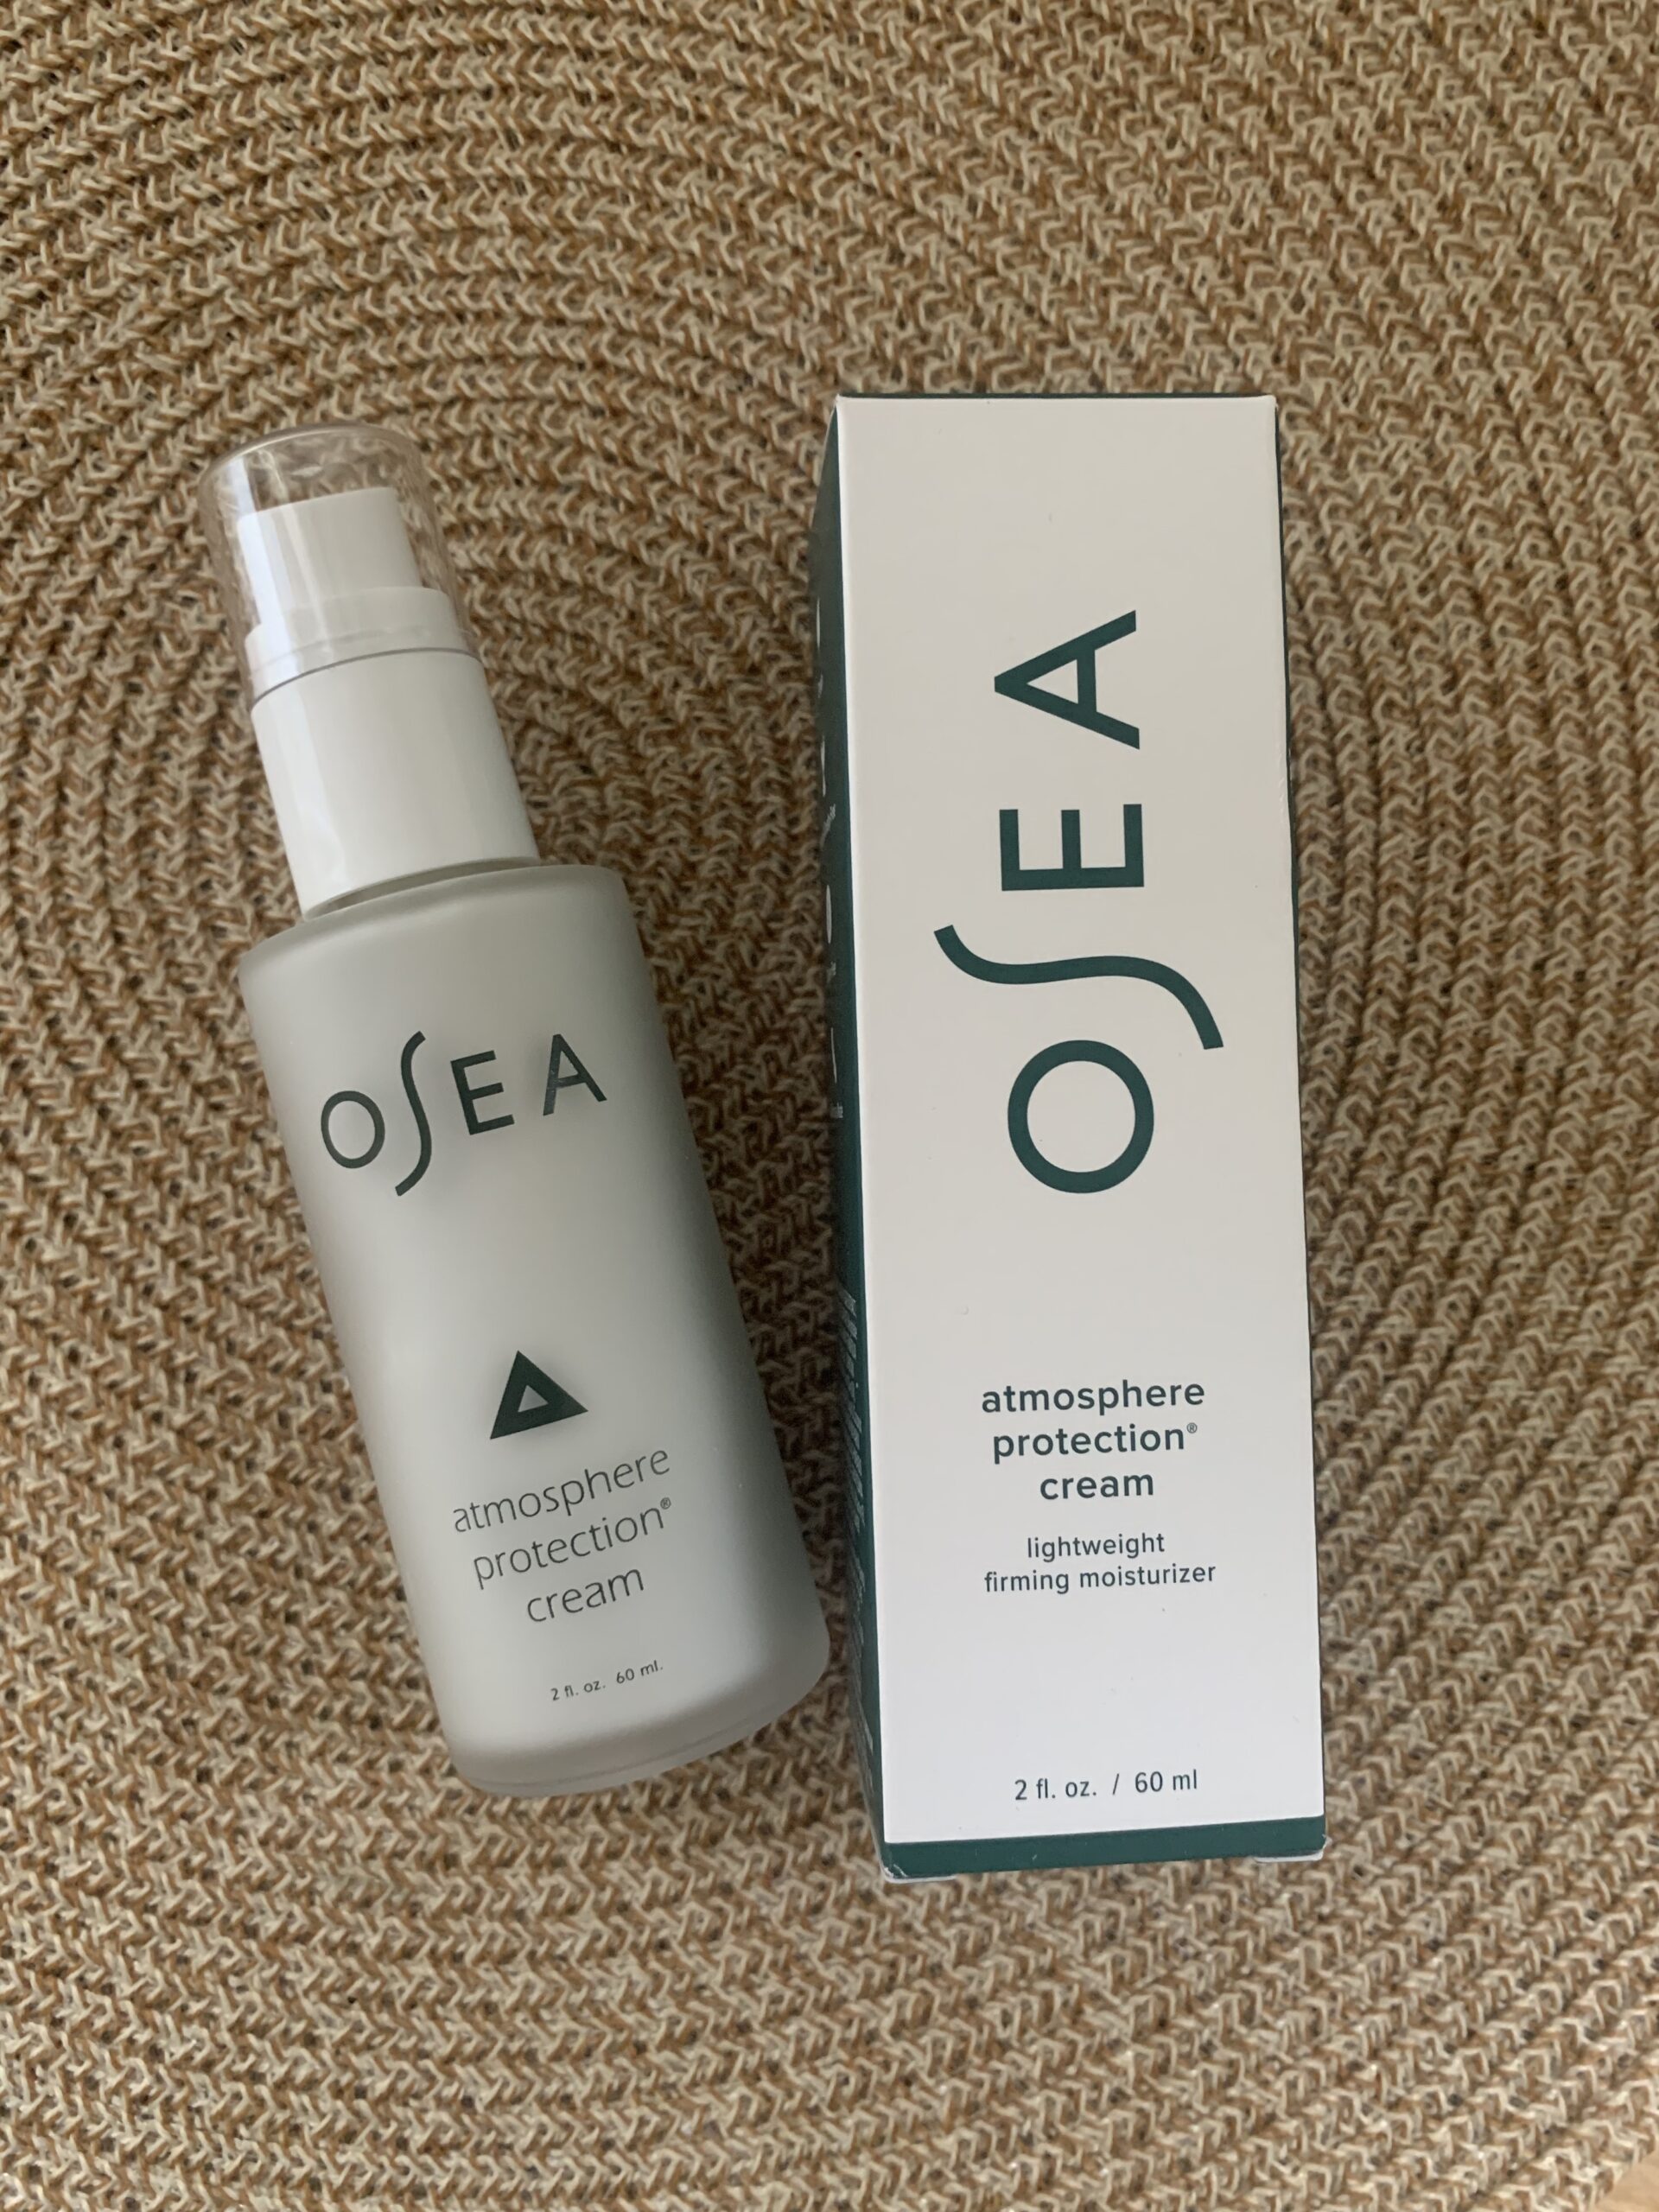 Osea atmosphere protection cream